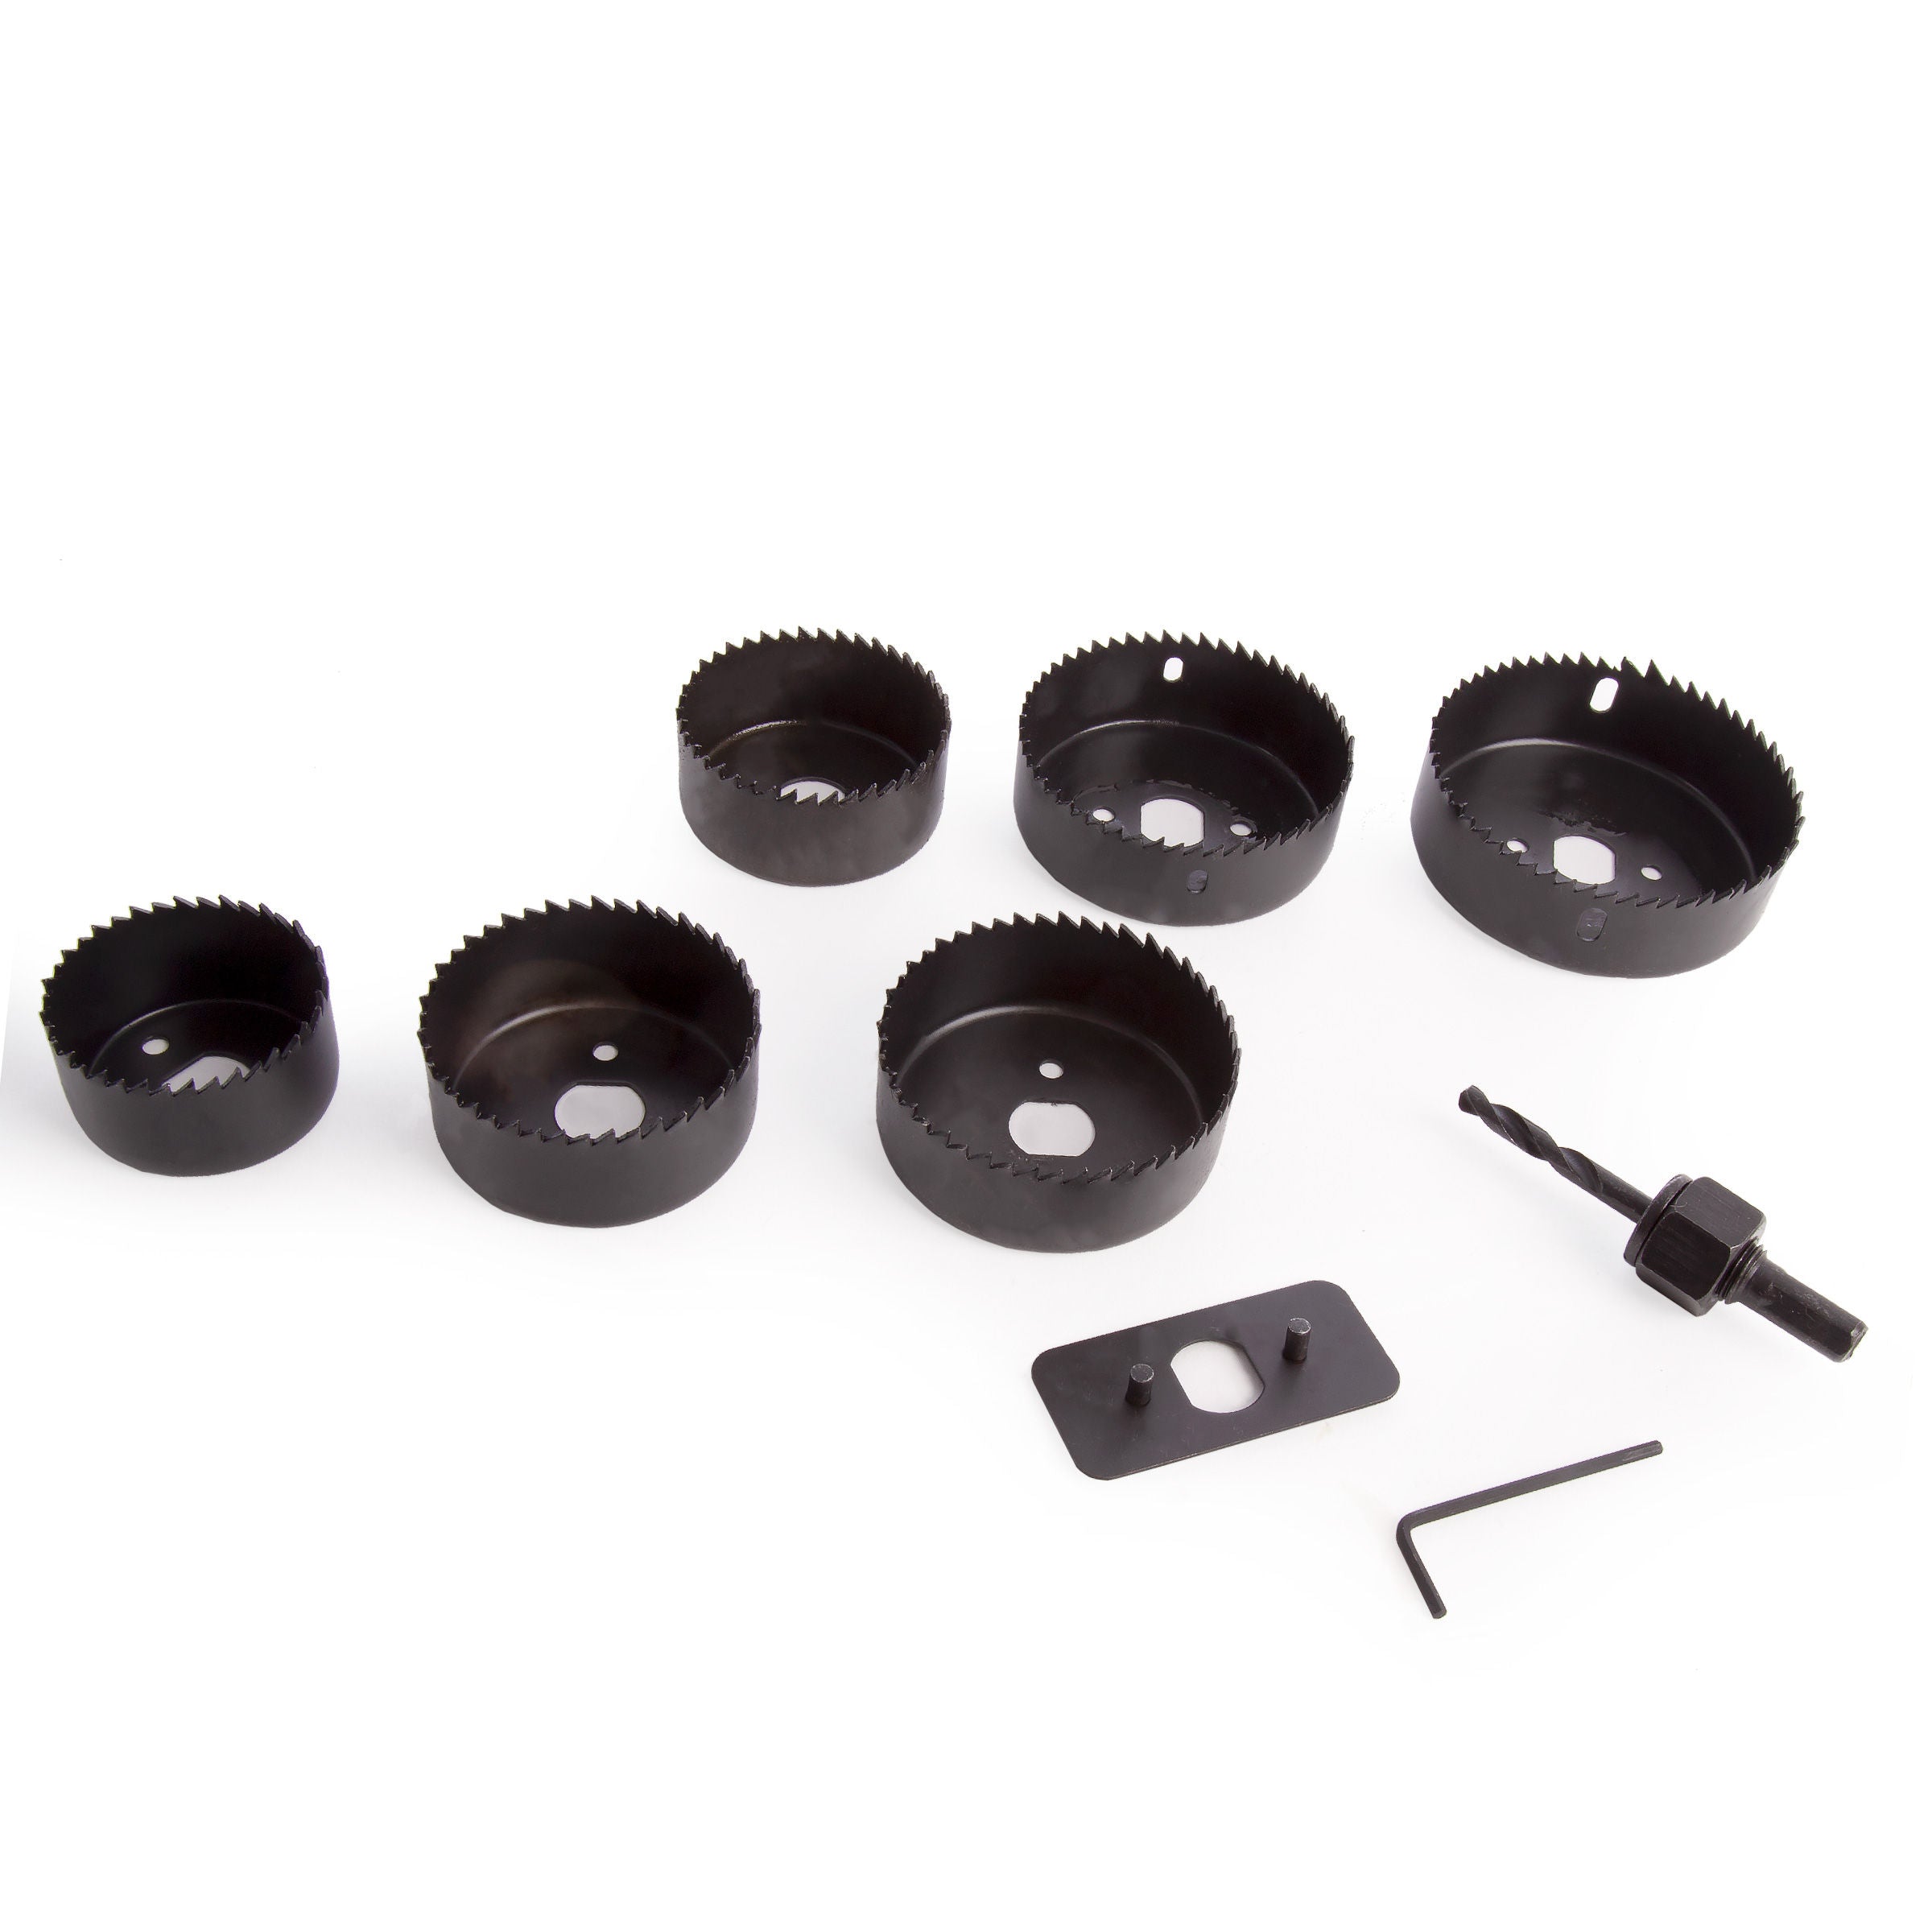 8pc Hole Saw Downlighter Set